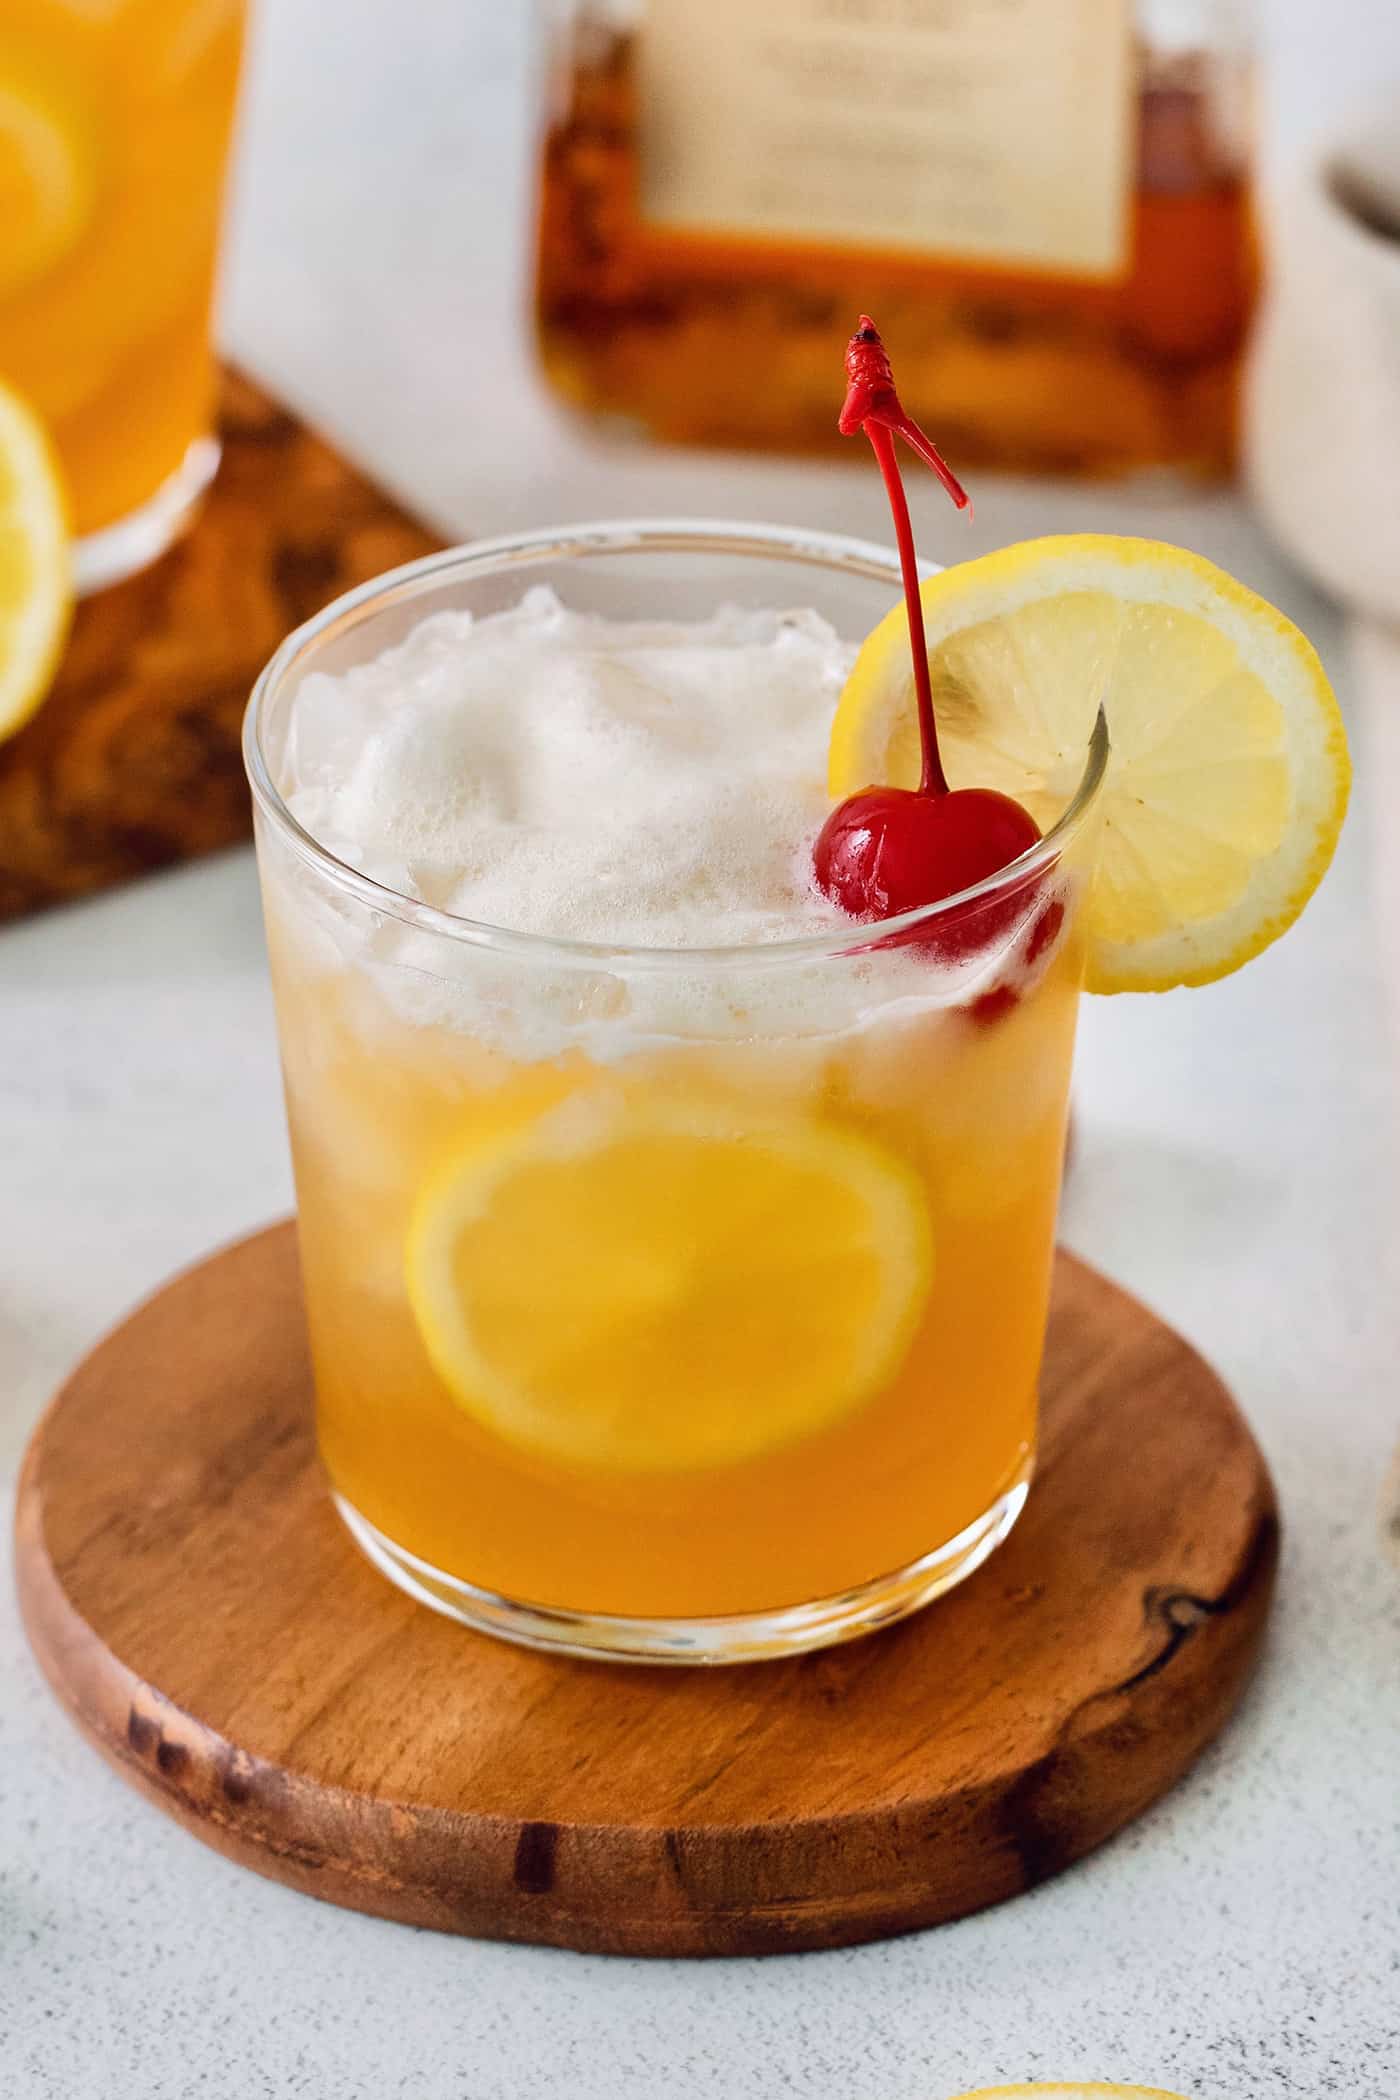 A glass of amaretto sour is garnished with a cherry and a slice of lemon on a wooden circle.